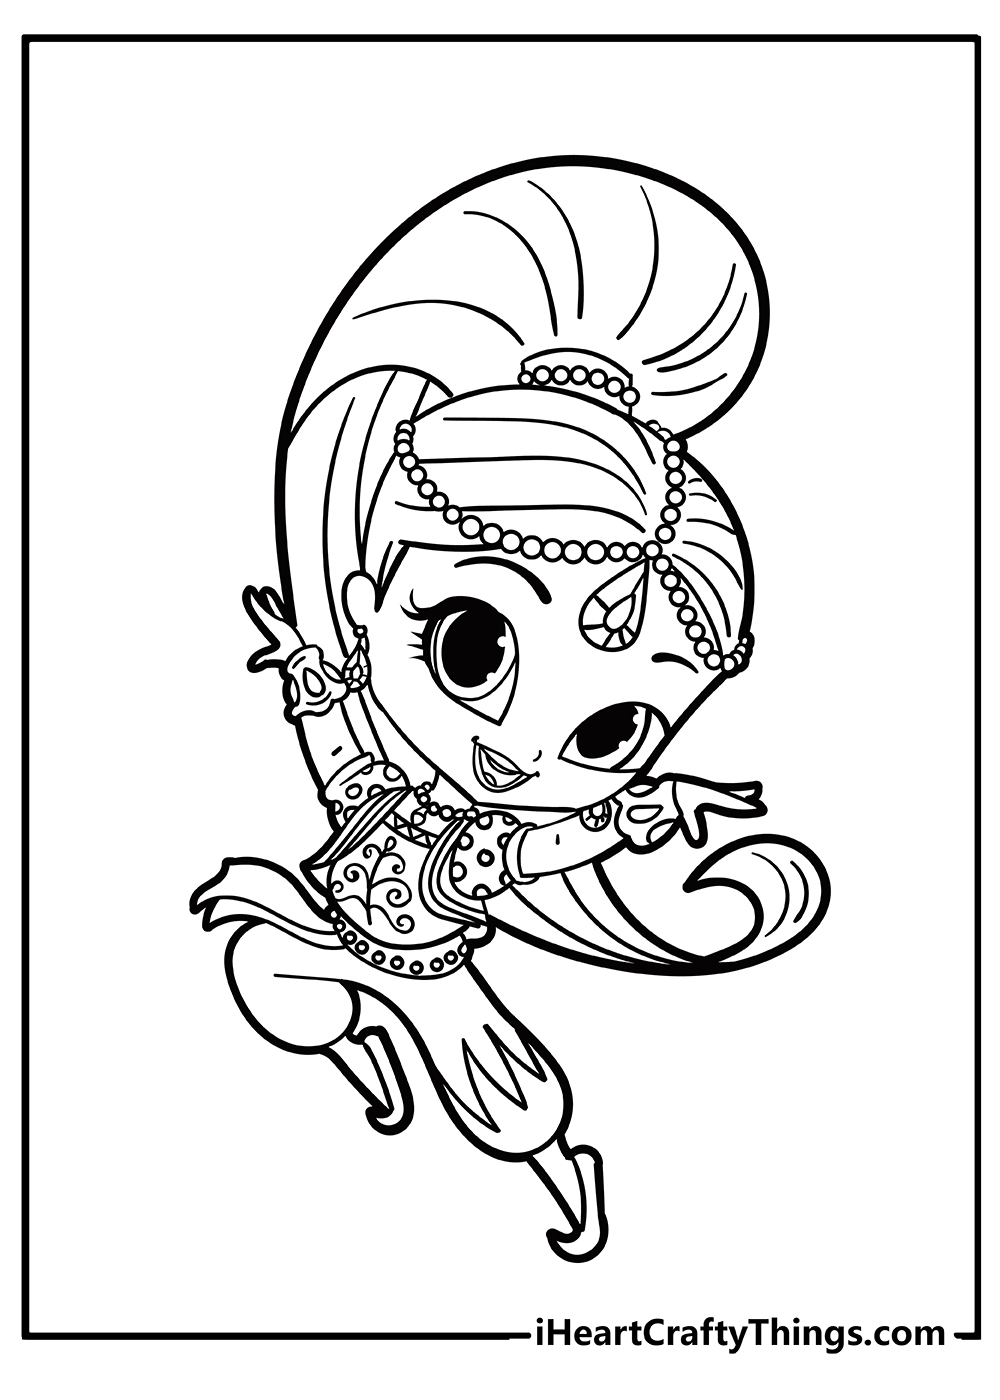 Shimmer and Shine Coloring Pages free pdf download